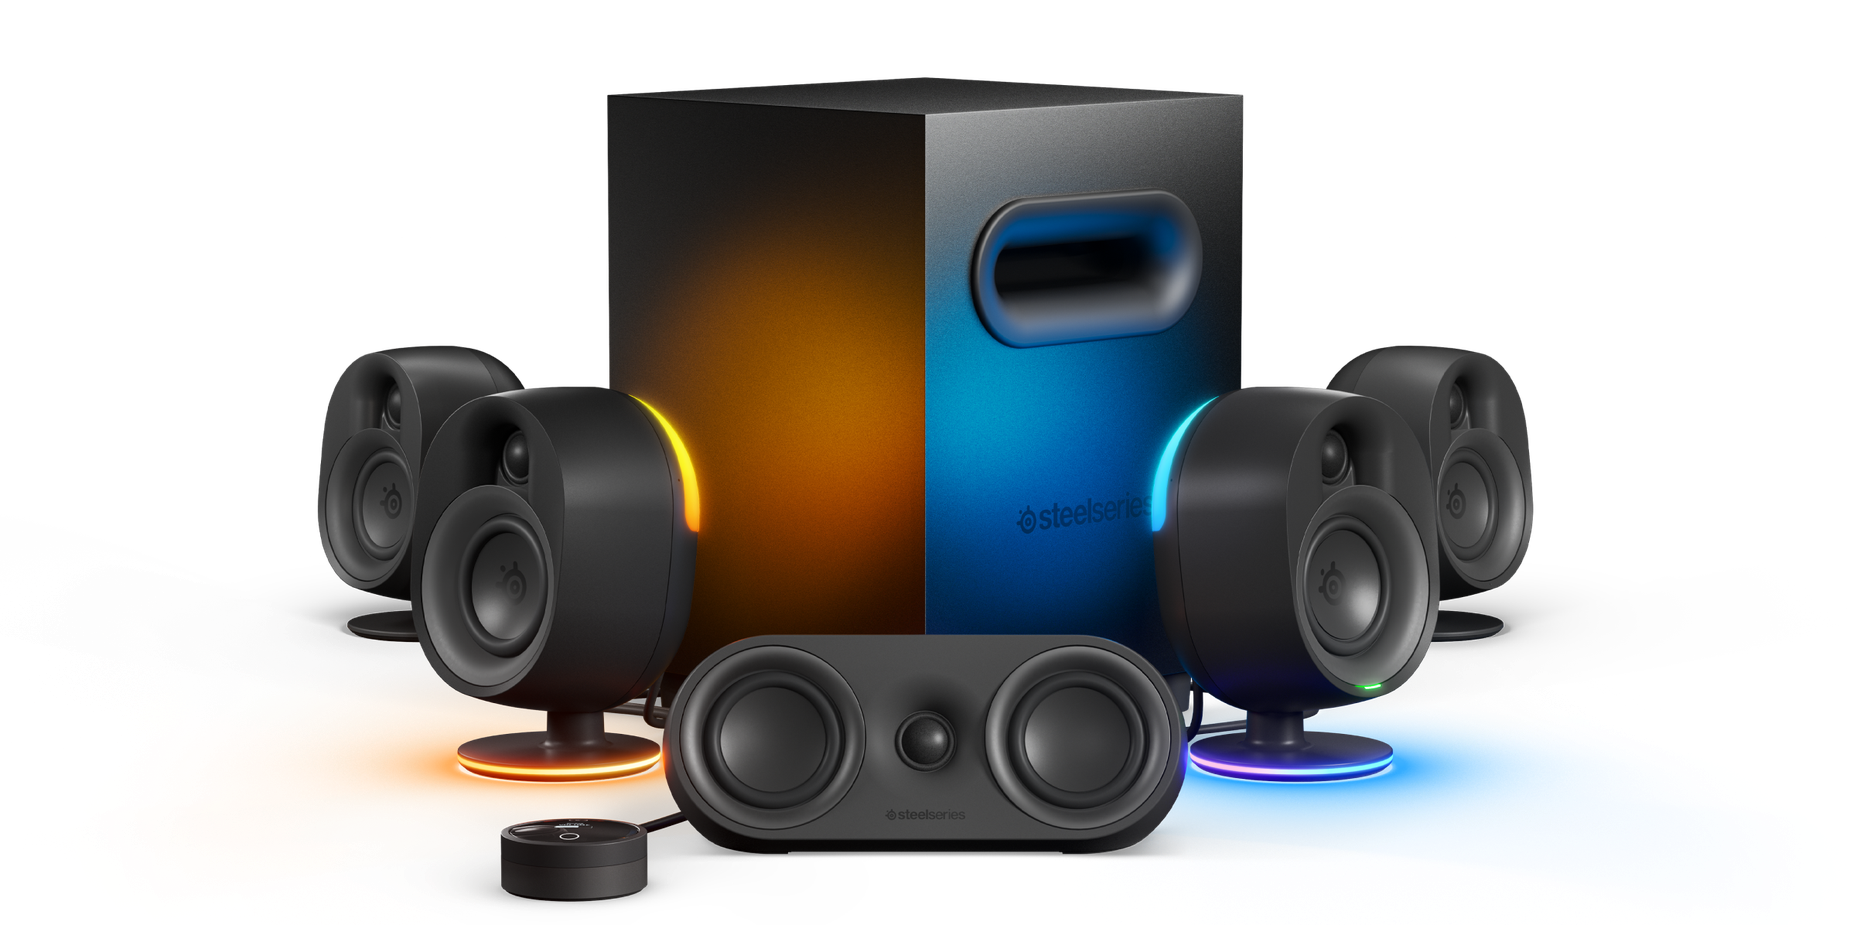 
 The complete Arena 9 product lineup includes a front, rear, and two-way speaker alongside the control pod and subwoofer.
 